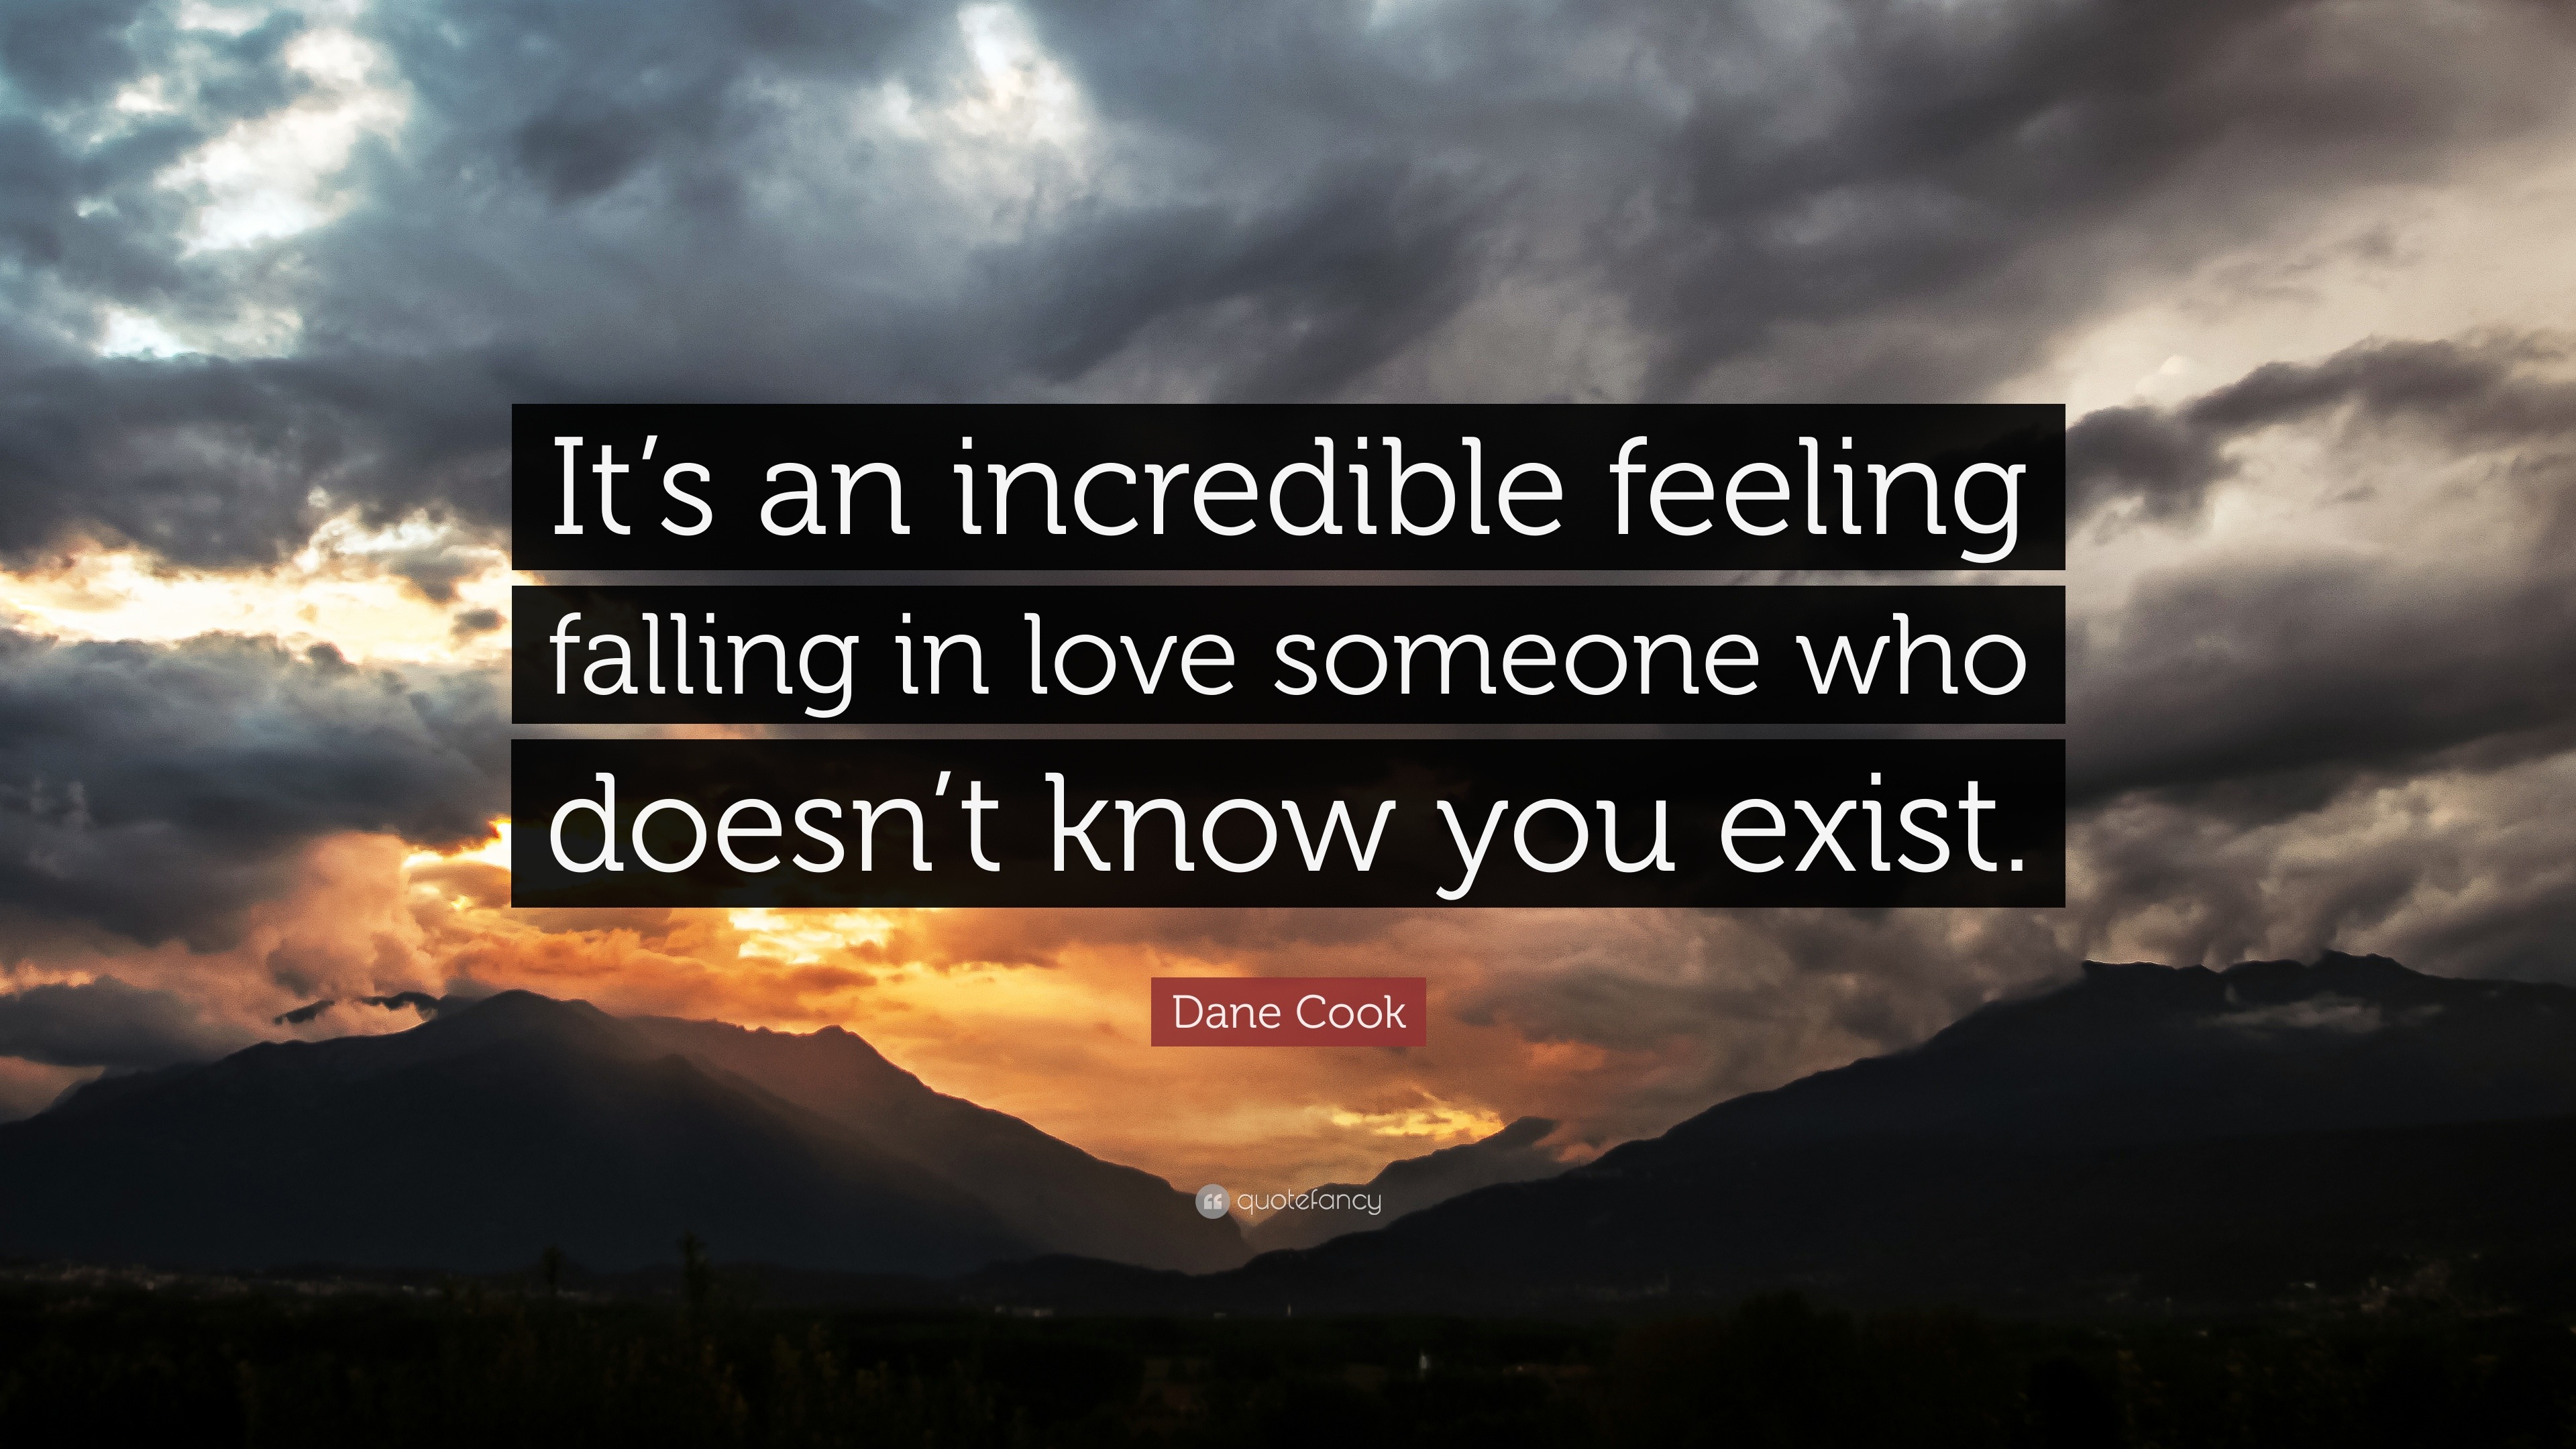 Dane Cook Quote “It s an incredible feeling falling in love someone who doesn